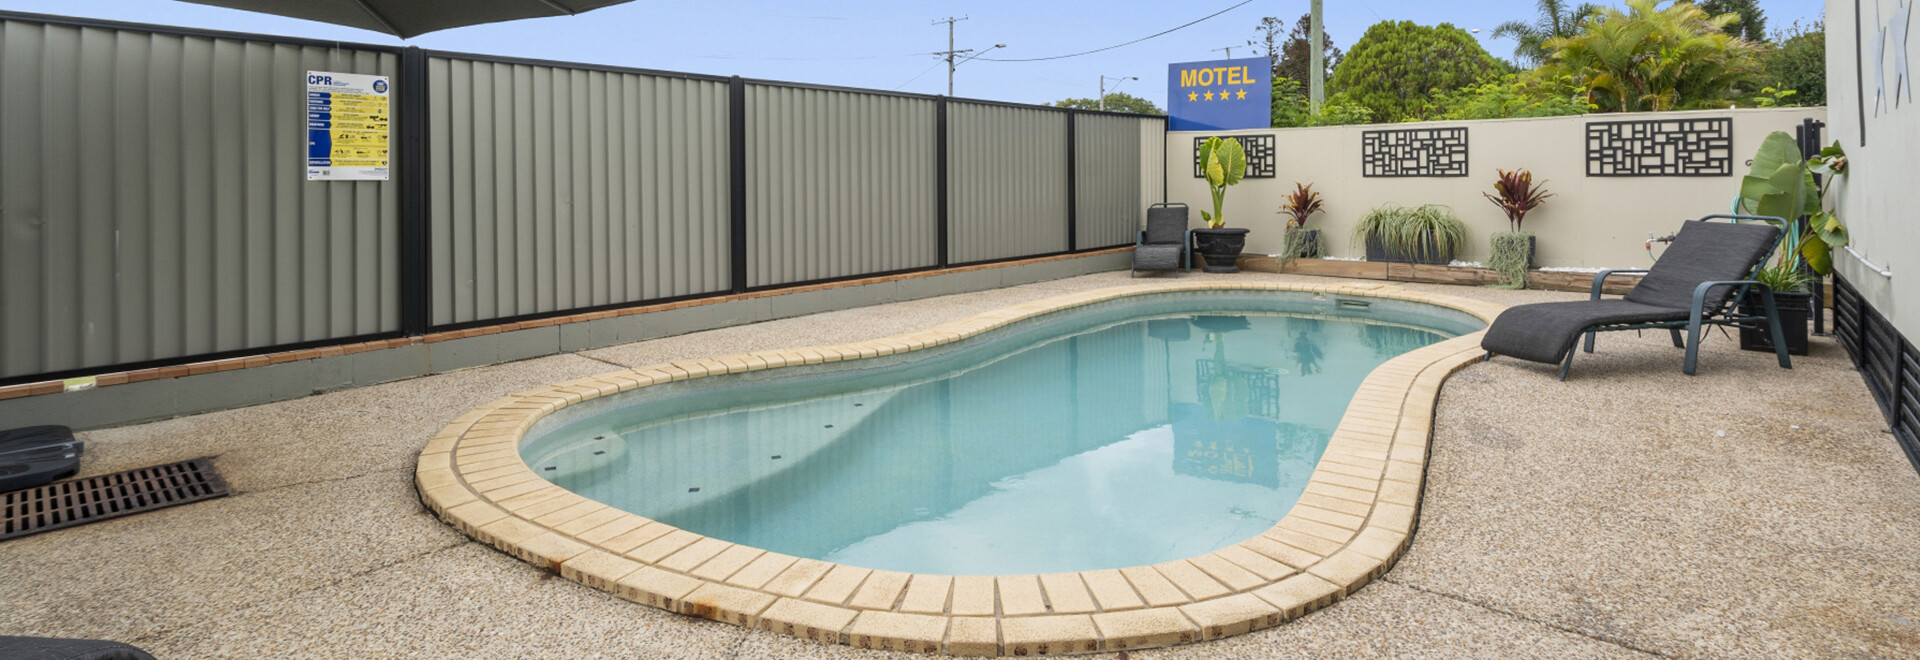 Pool - Caboolture Central Motor Inn